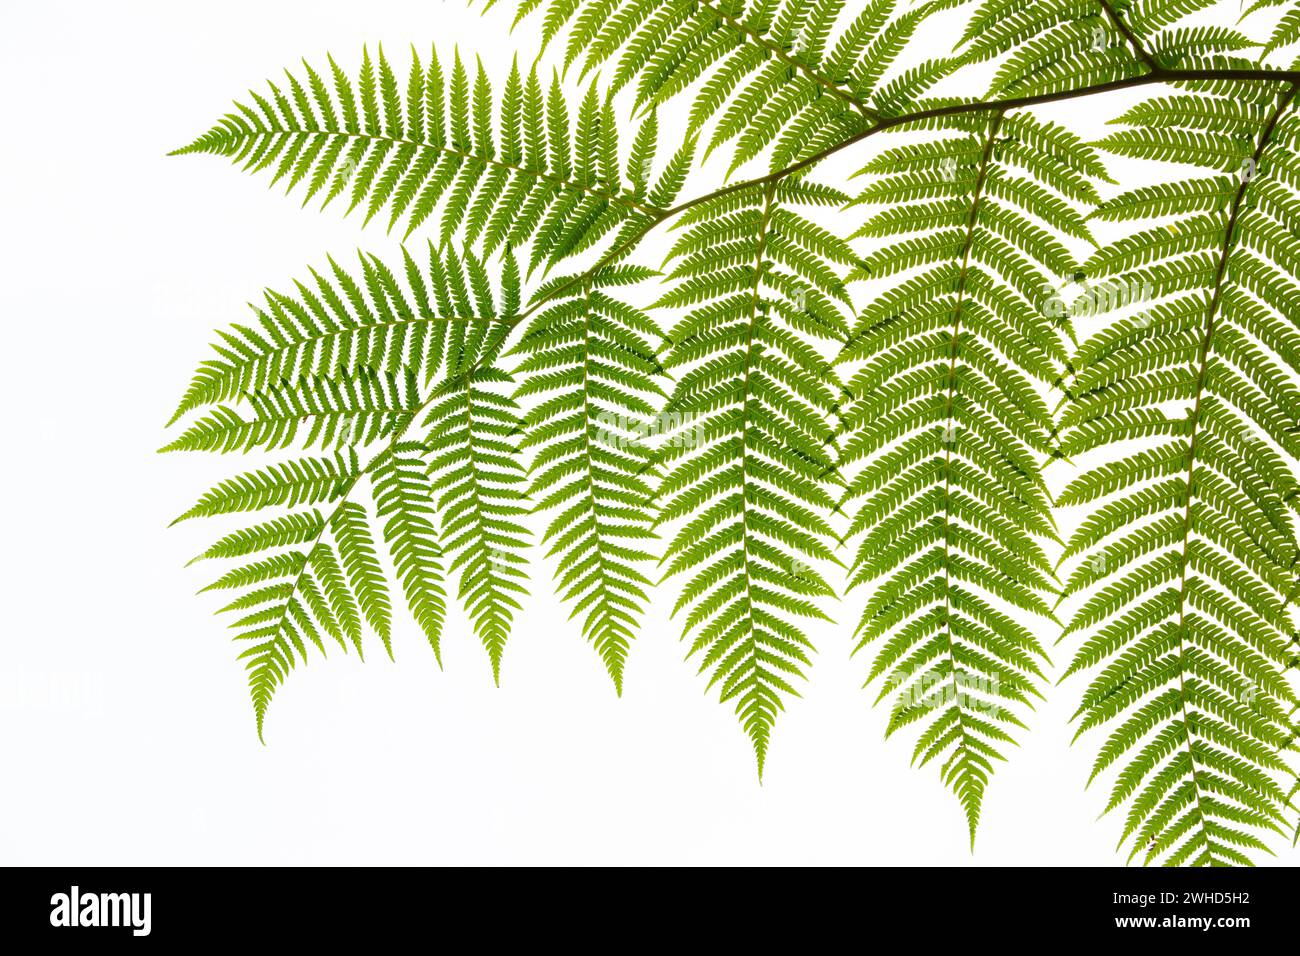 Africa, fern, forest, Garden Route, Garden Route National Park, Hi-Key, South Africa, Western Cape Province, wilderness, nature, National Park, no people, outdoors, abstract, white background, bracken Stock Photo